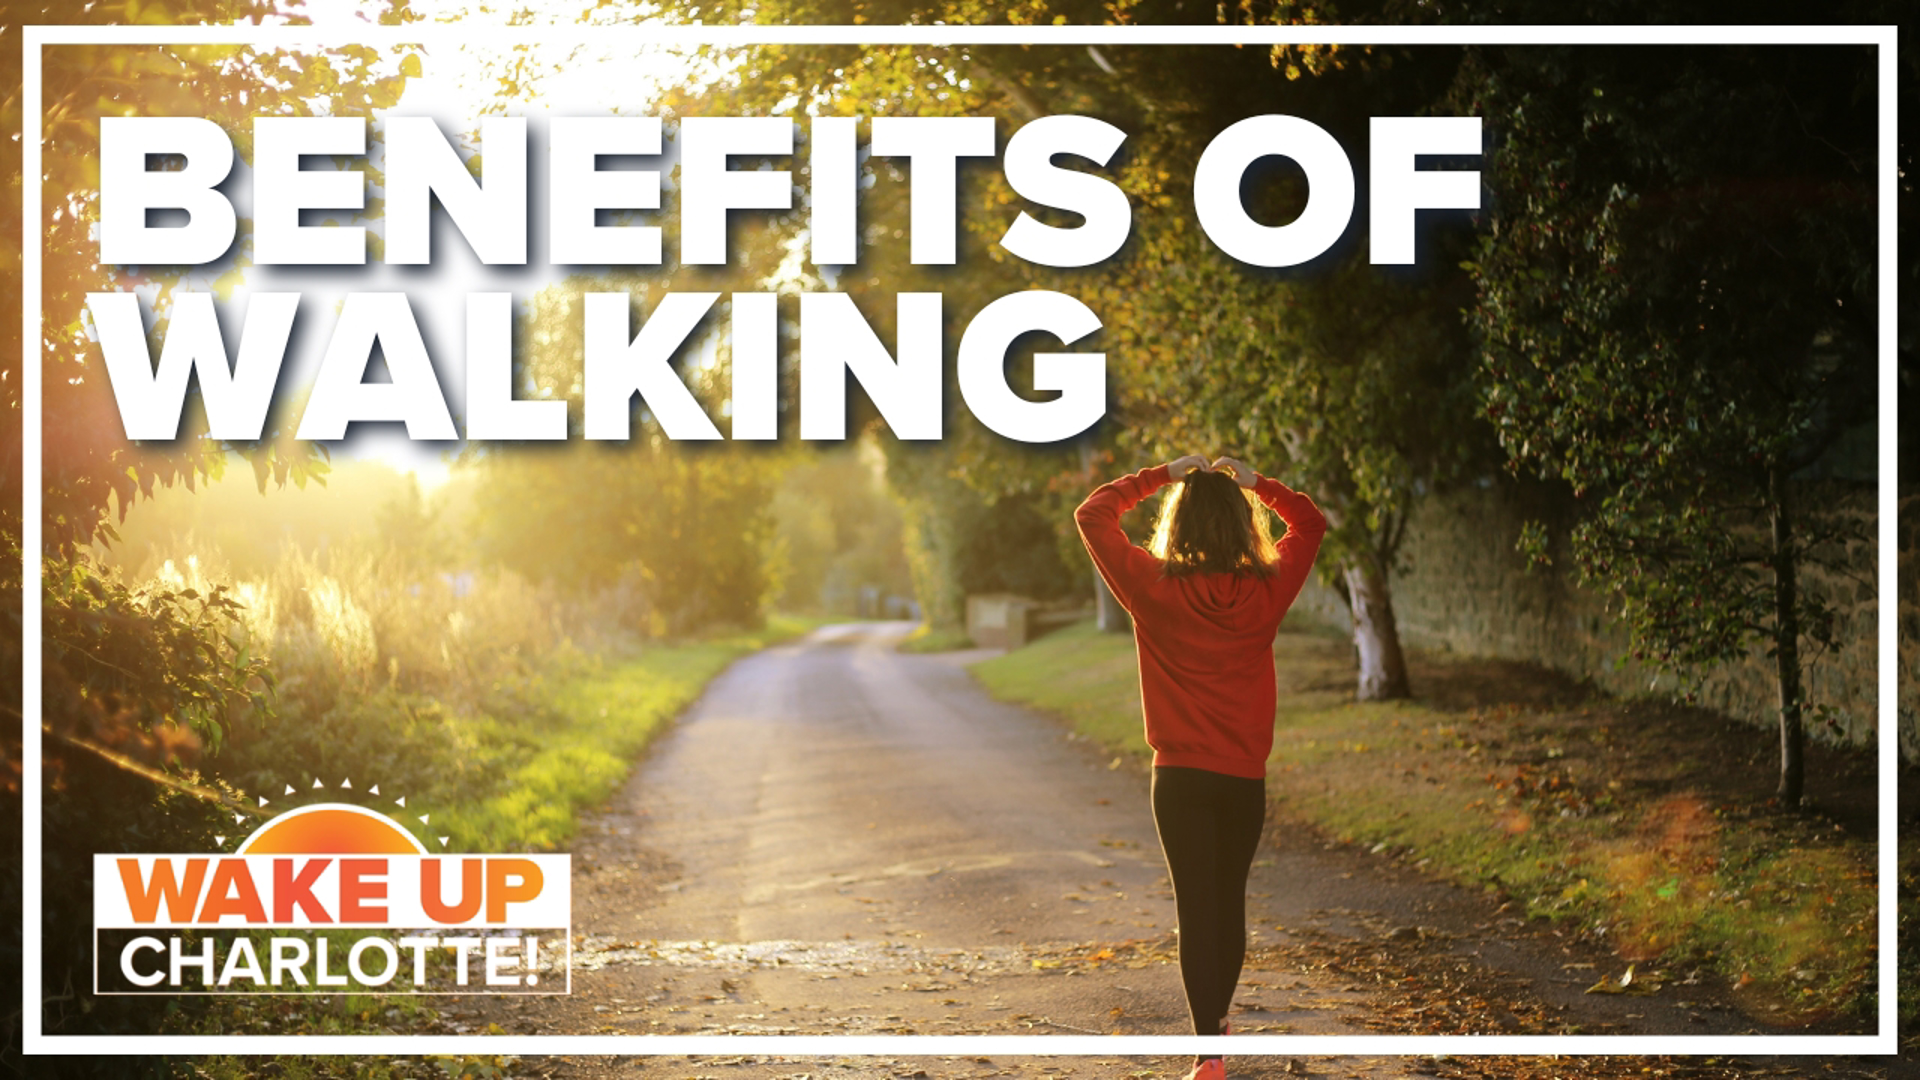 Researchers found just two minutes walking after a meal impacts your wellness.